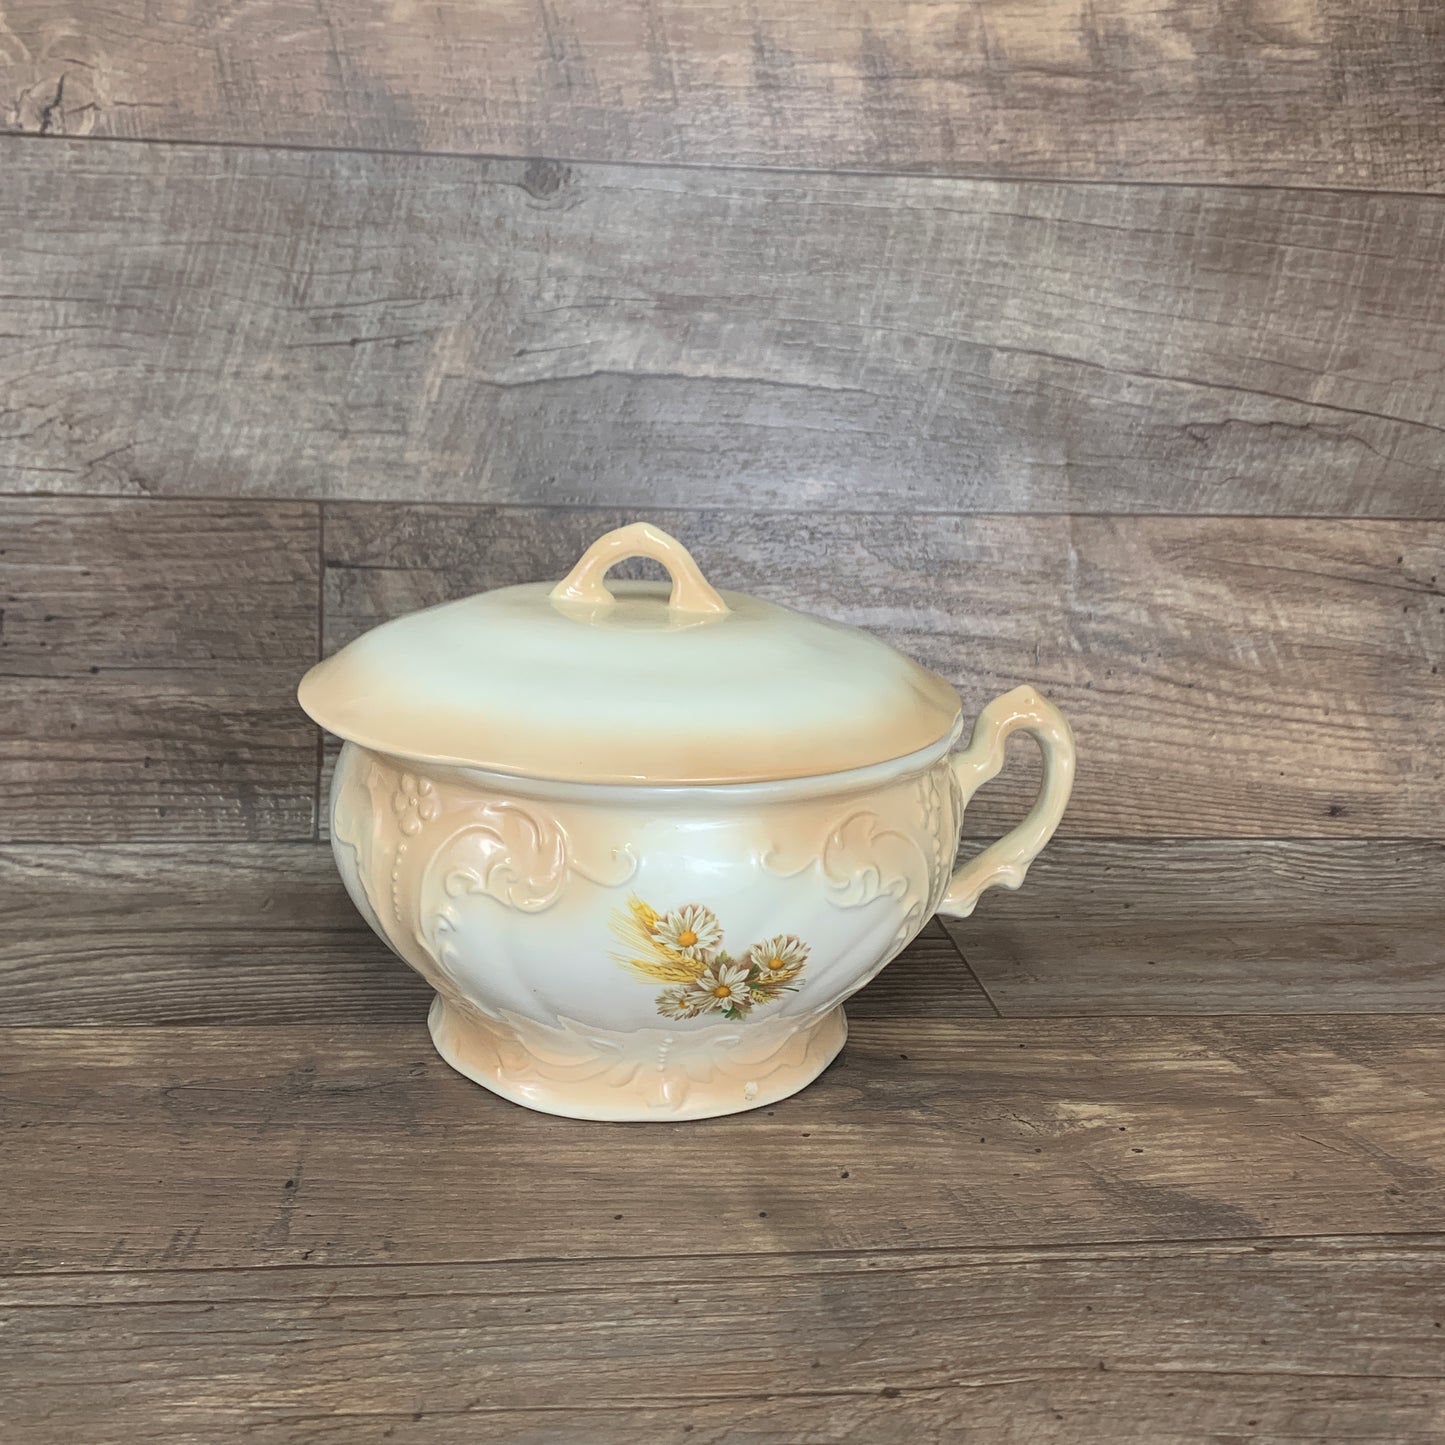 Vintage Ceramic Lidded Chamber Pot with Daisy and Wheat Transfer